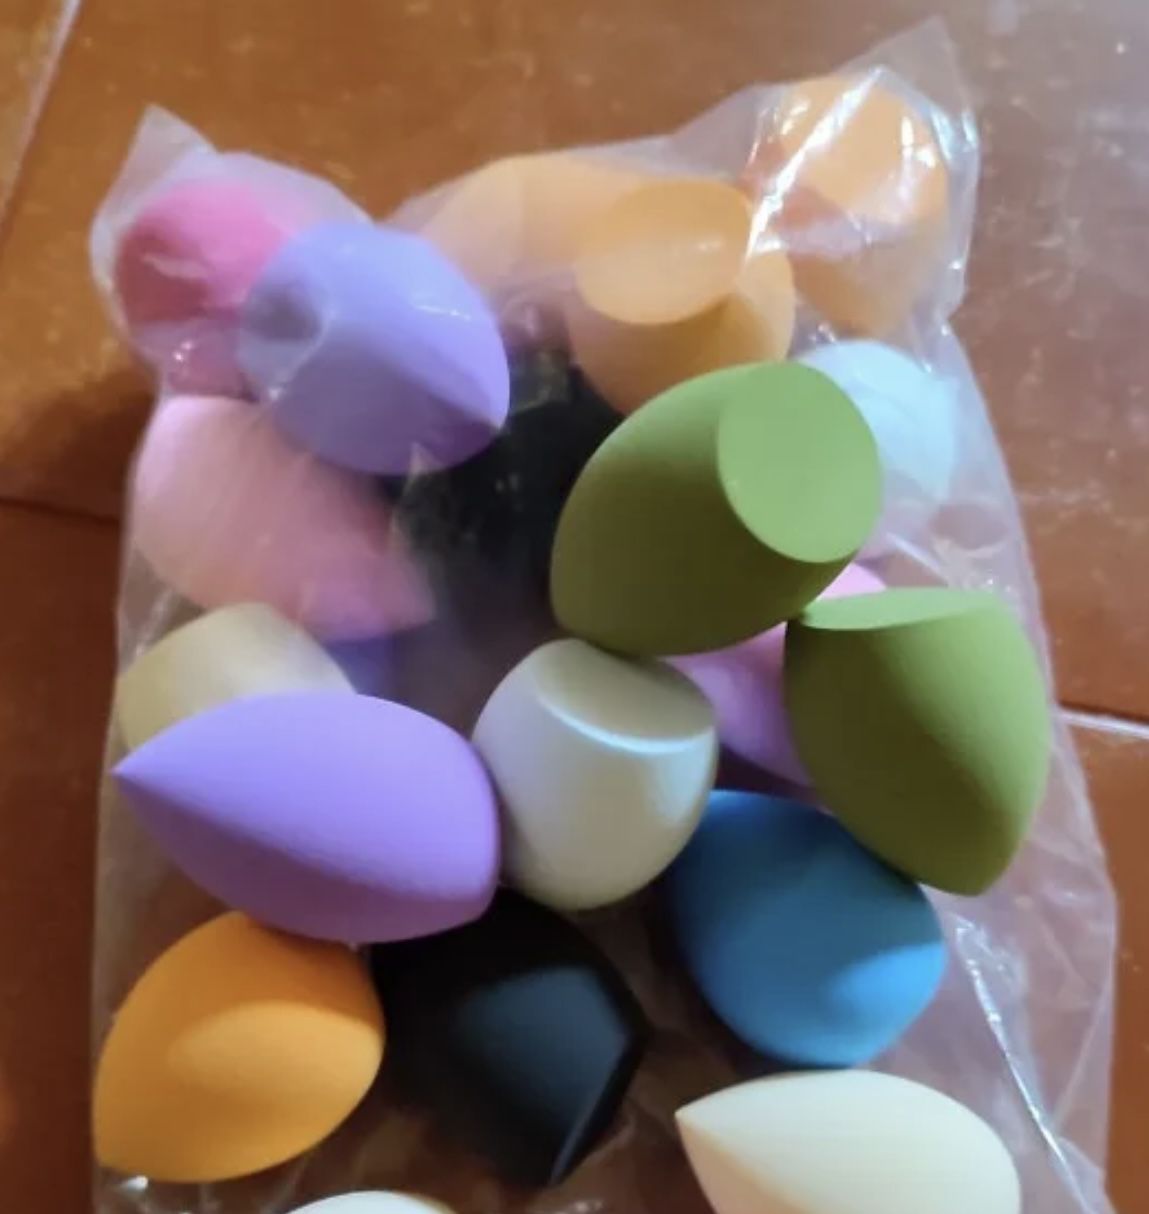 3 BEAUTY BLENDERS FOR JUST $8 